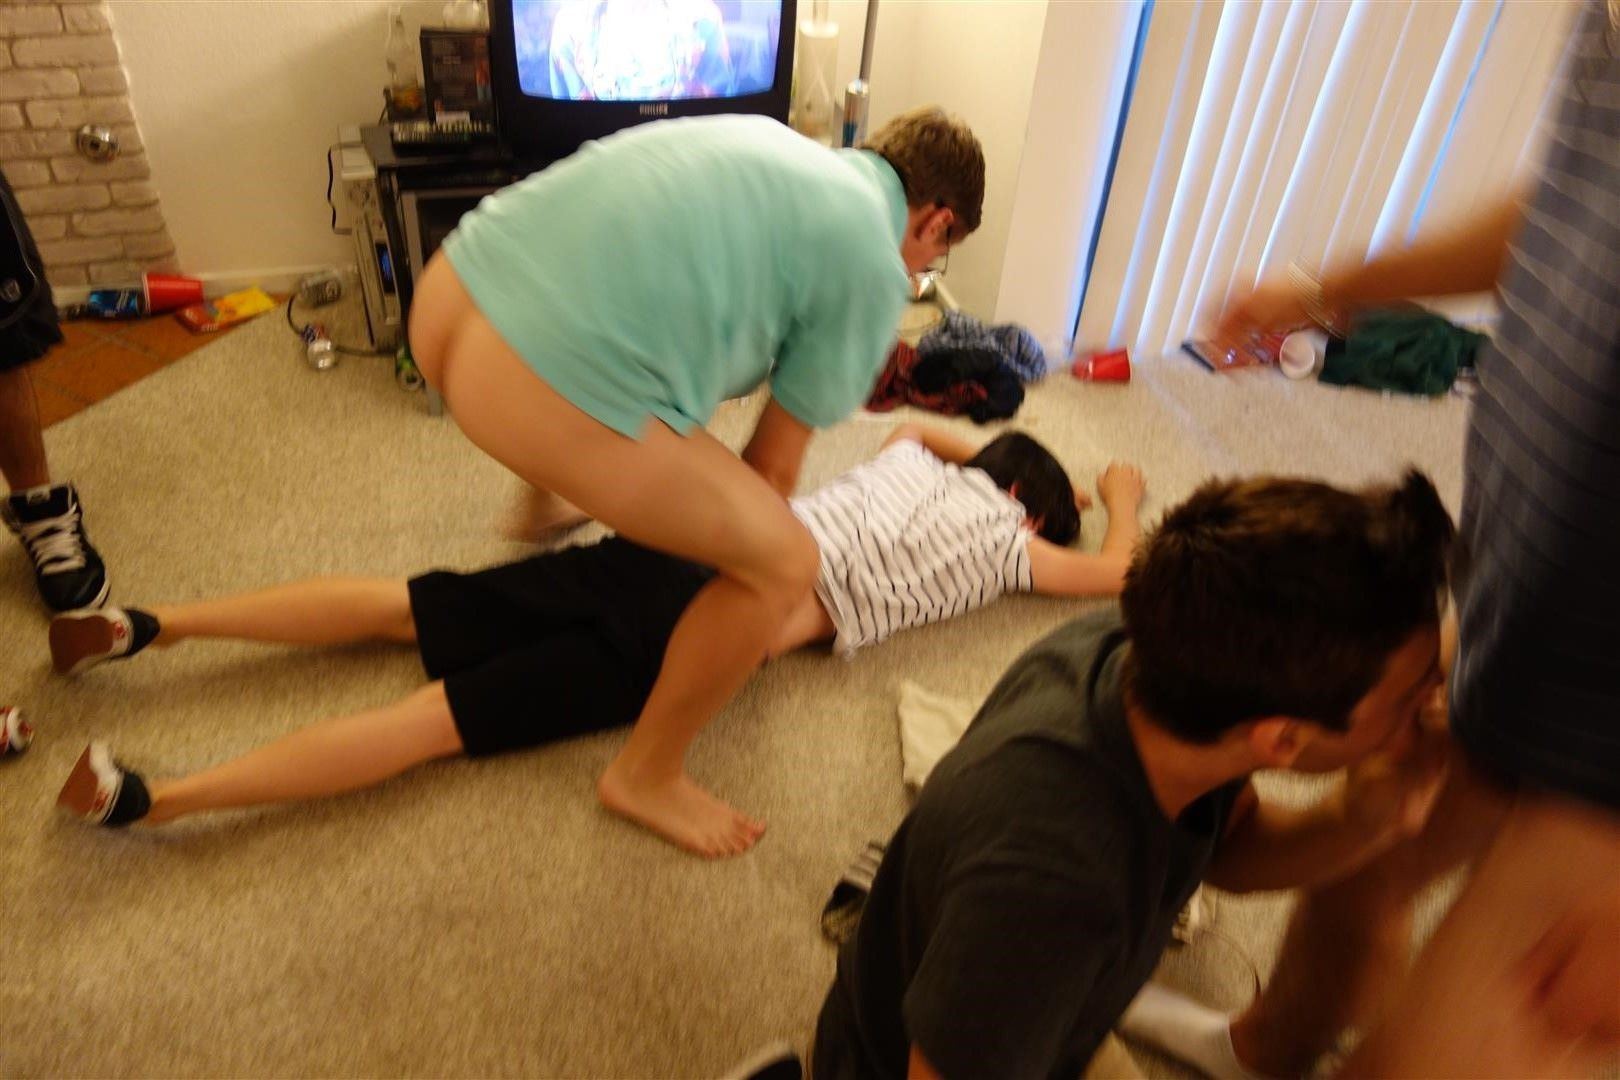 Passed out frat boy gets fucked